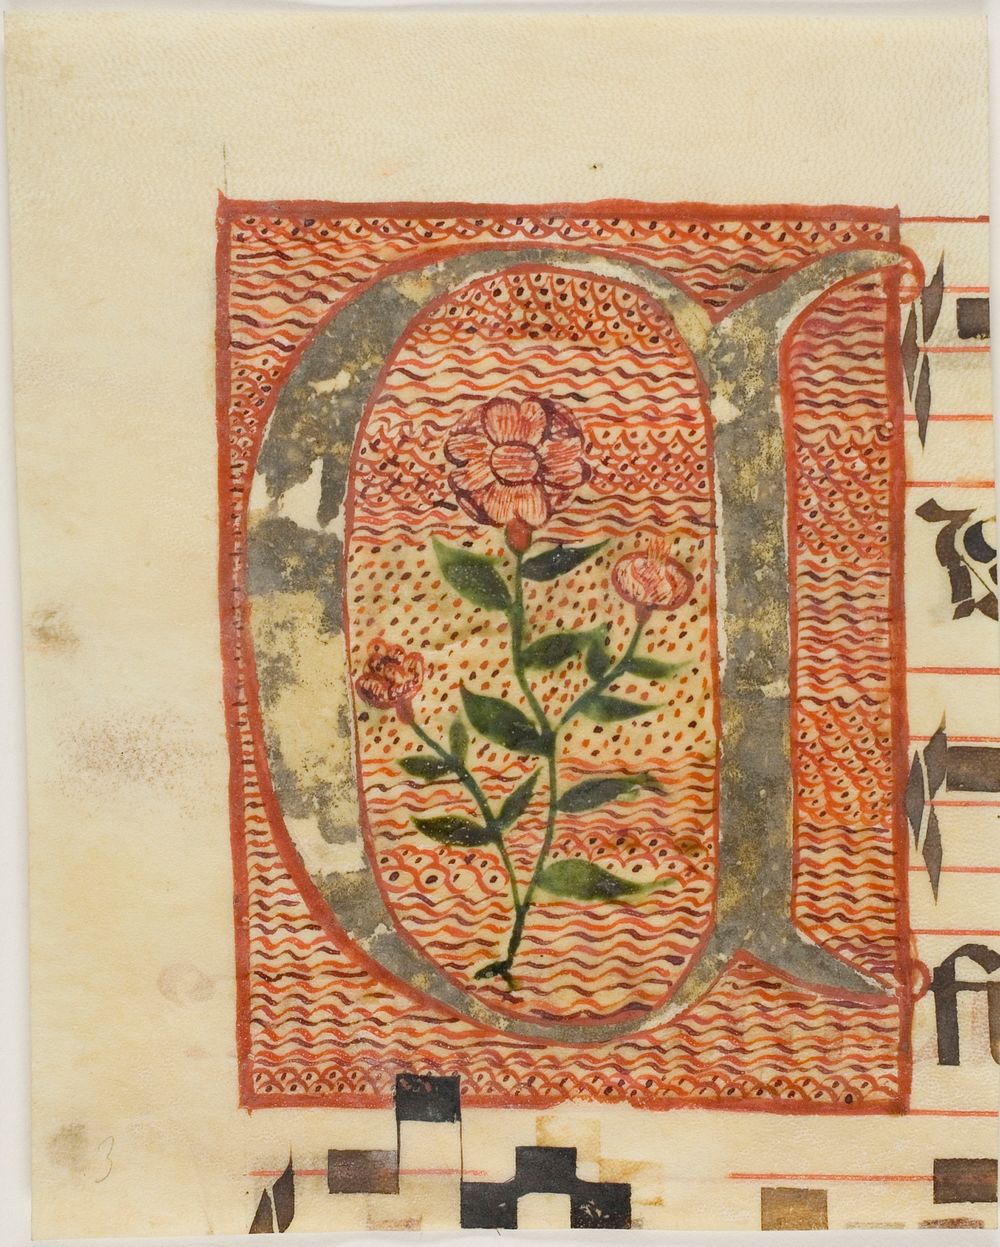 Decorated Initial "A" with Flower from a Manuscript